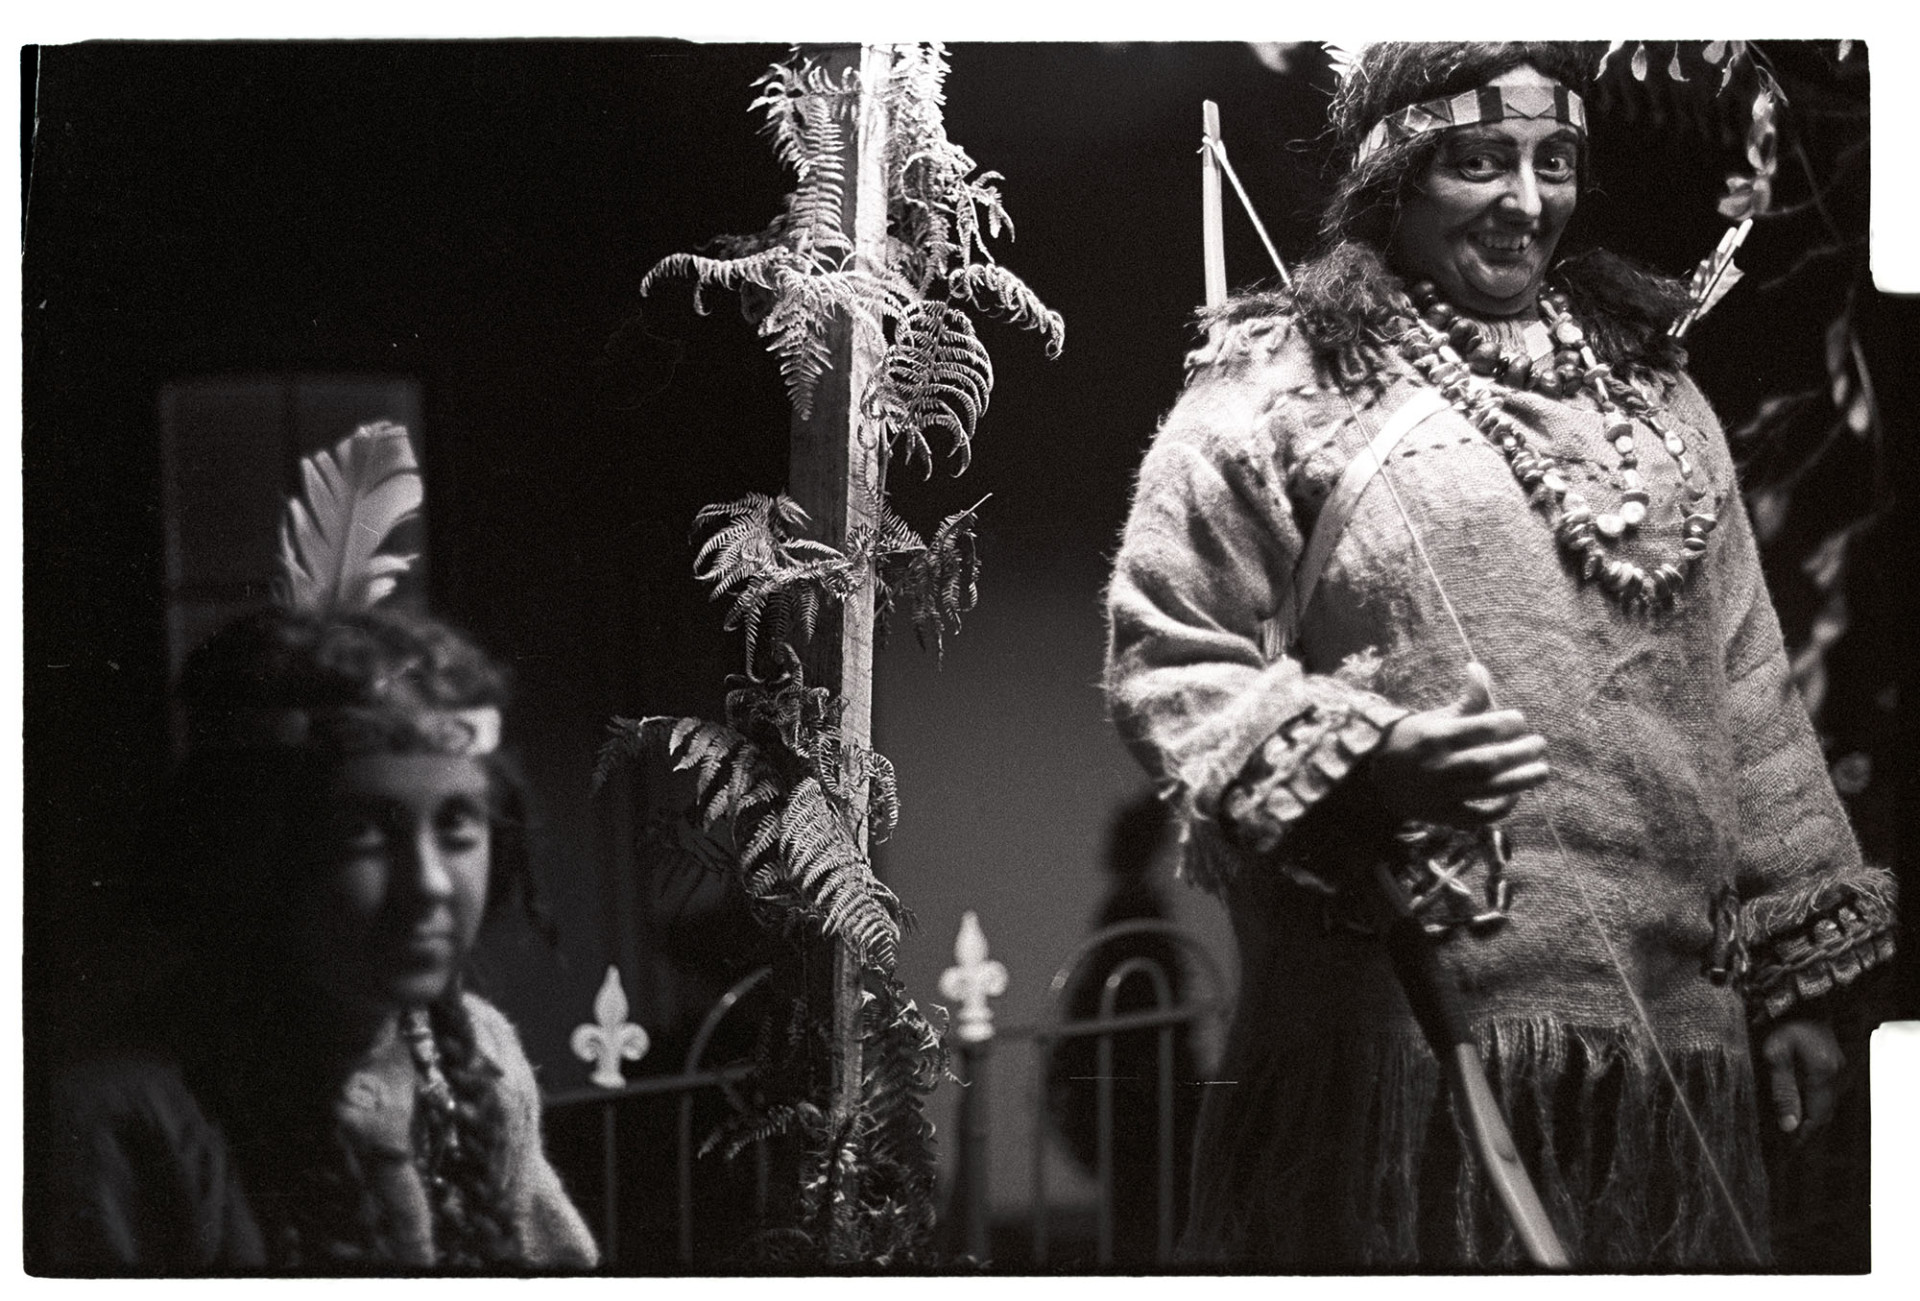 Fancy Dress on float at night.
[People on a carnival float dressed in Native Indian costumes at Dolton Carnival.]